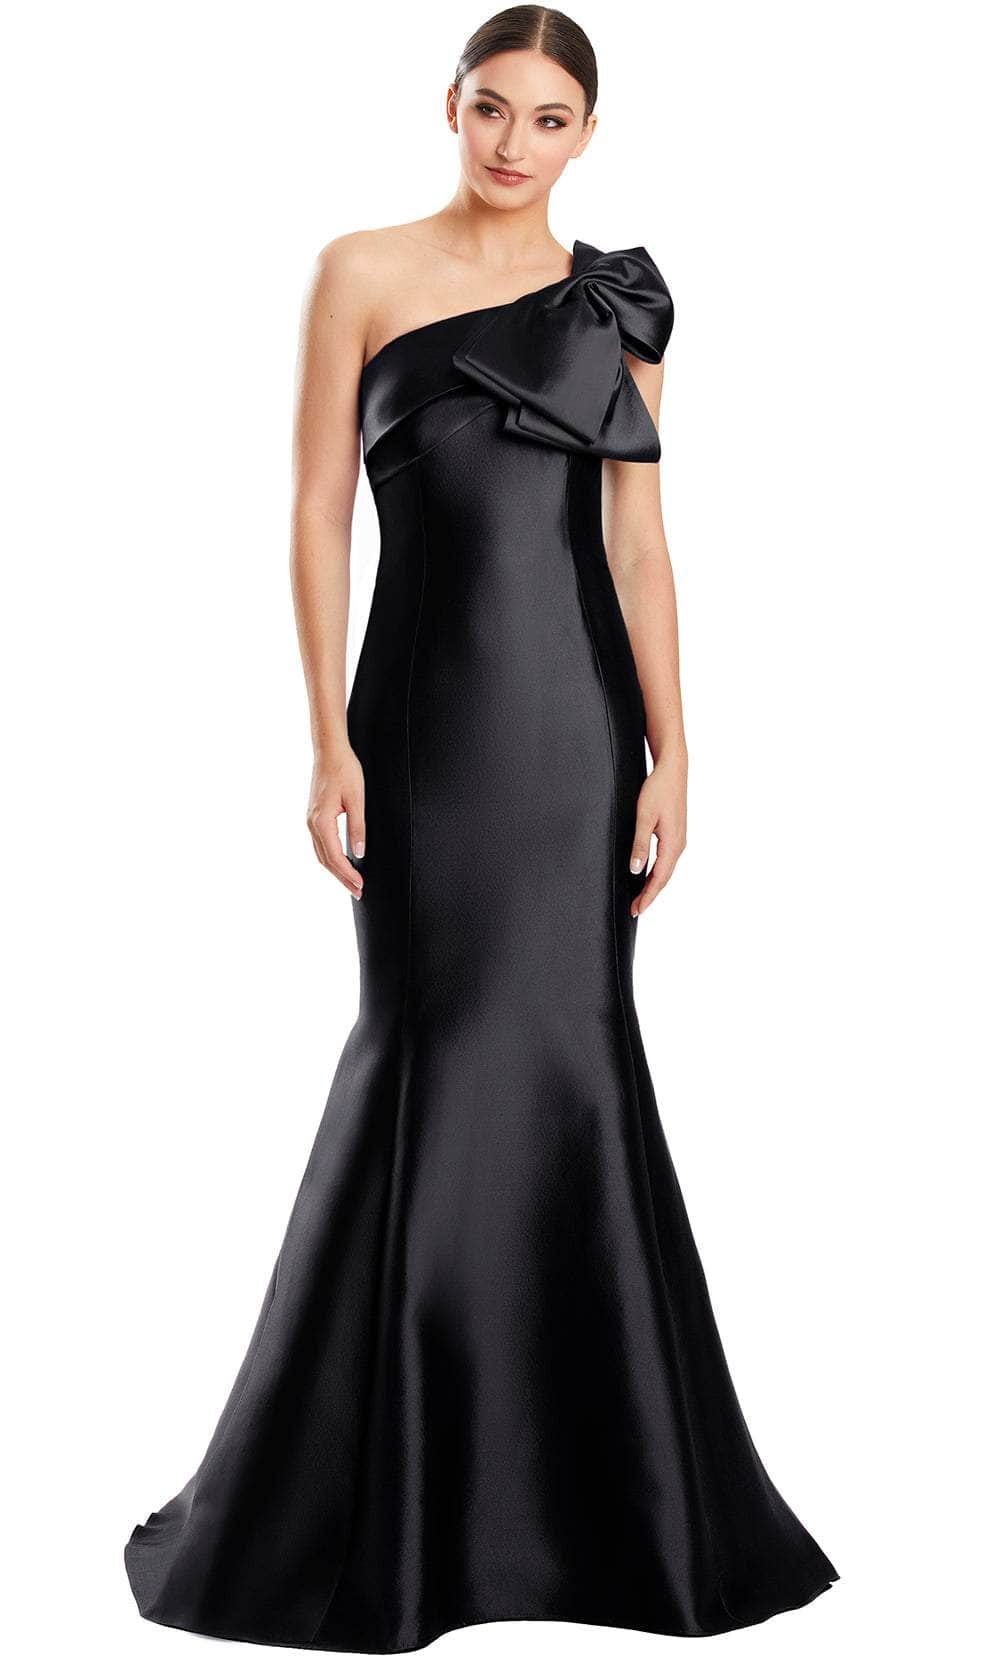 Alexander by Daymor, Alexander by Daymor 1850F23 - Bow Accent Asymmetric Evening Gown